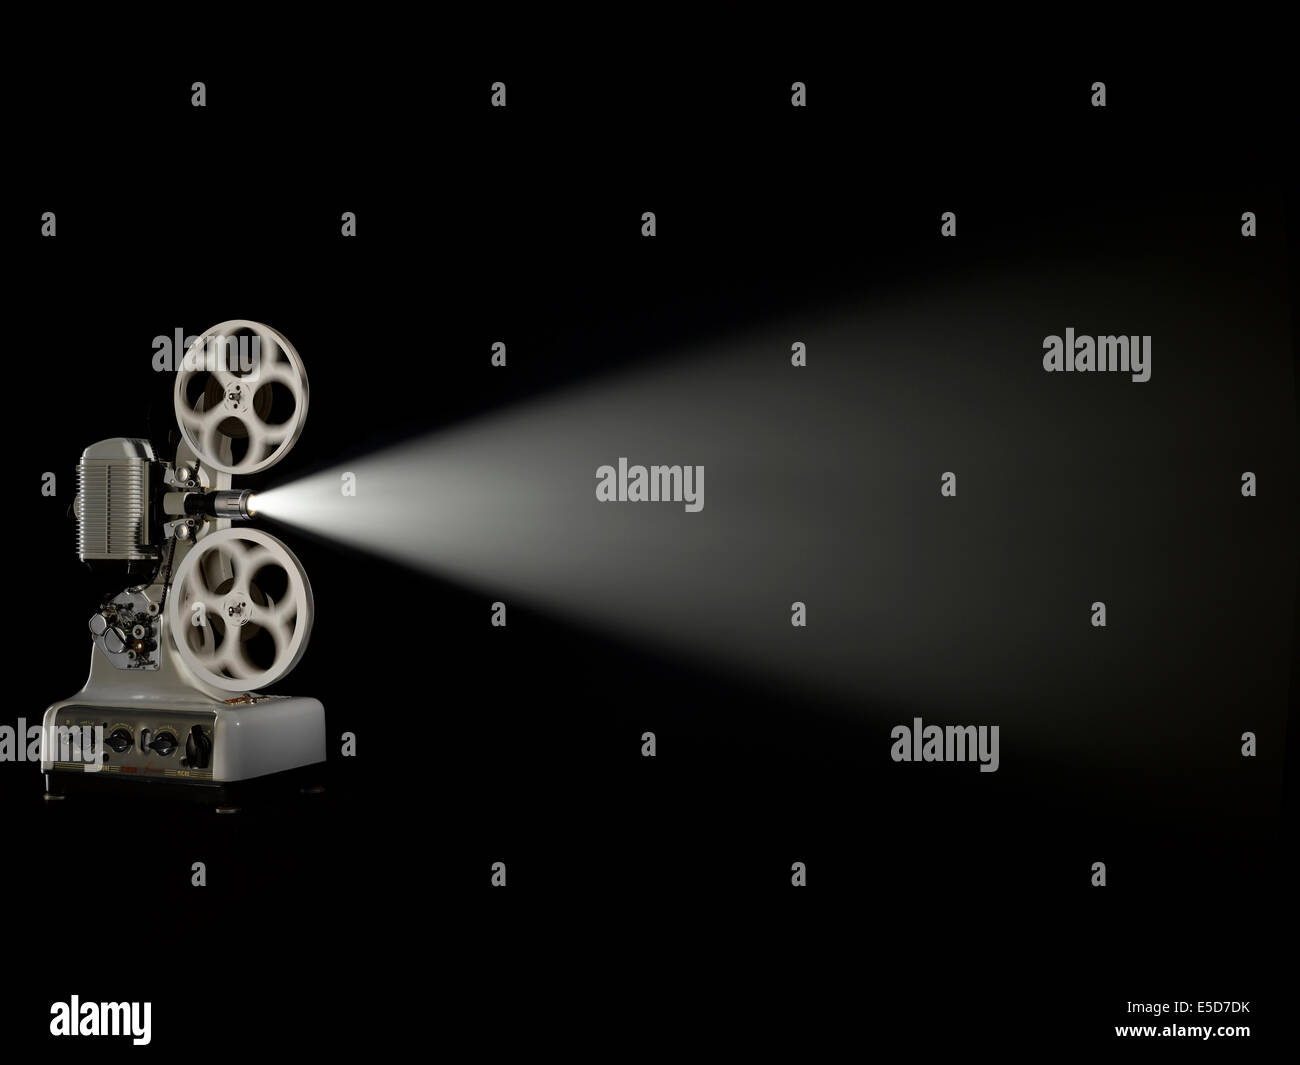 A three quarter angle shot of an old style film projector shot against a dark background Stock Photo